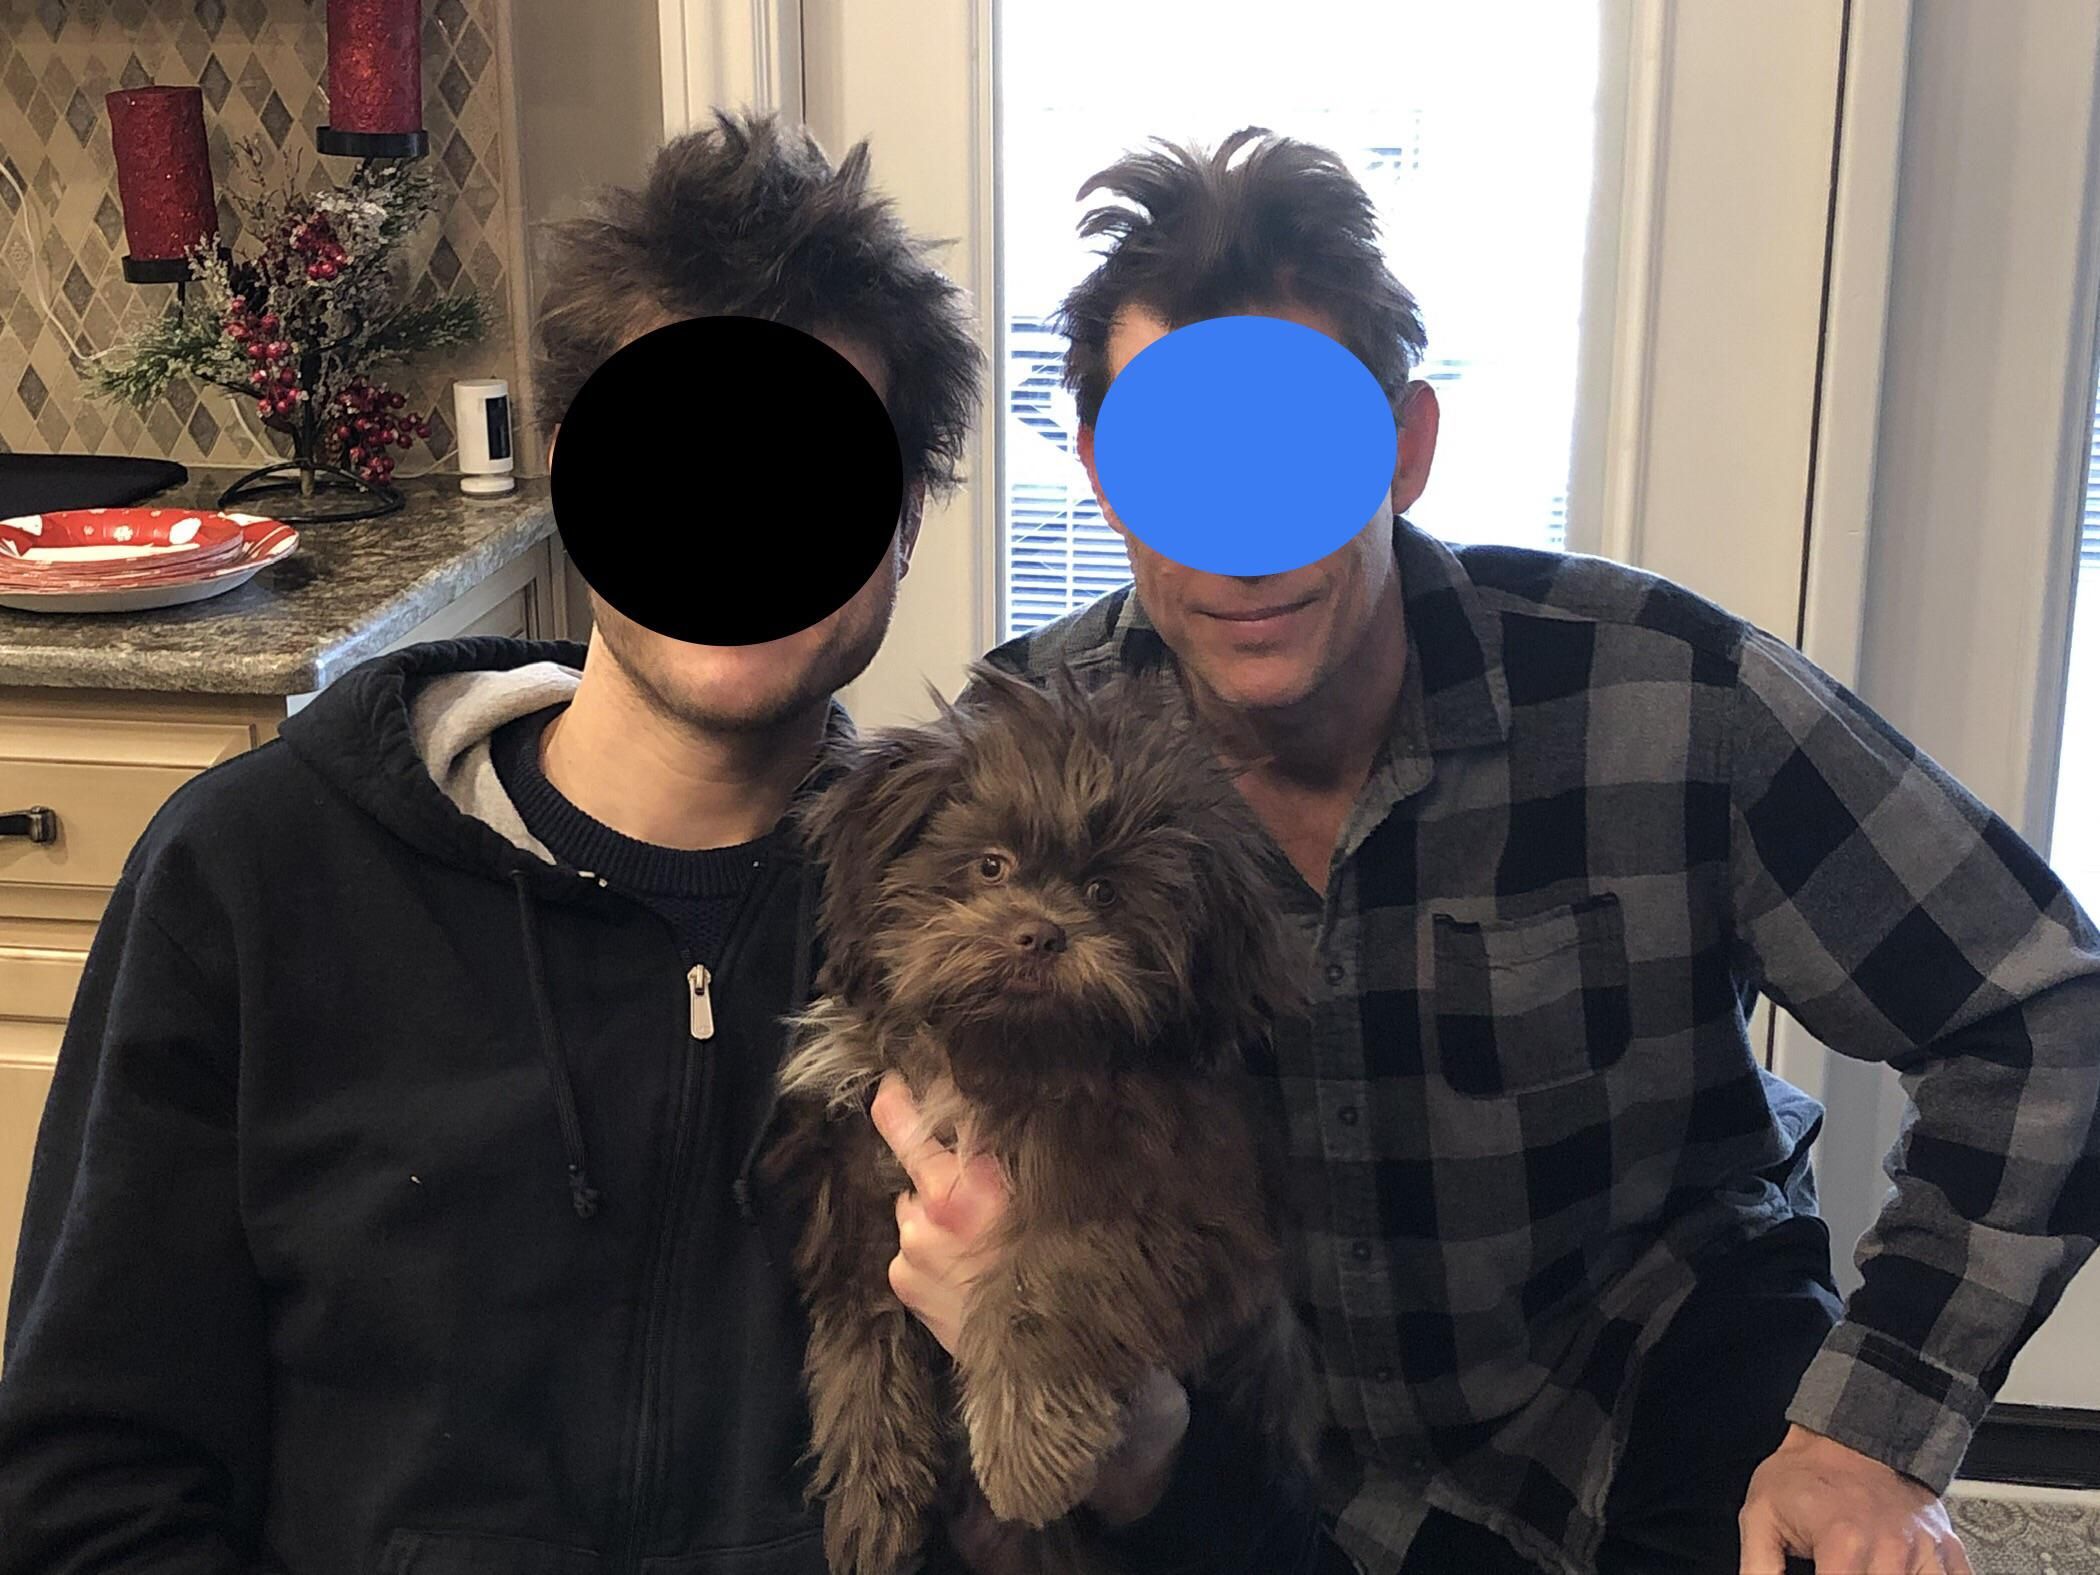 My dad, his dog, and I all share the same hair cut